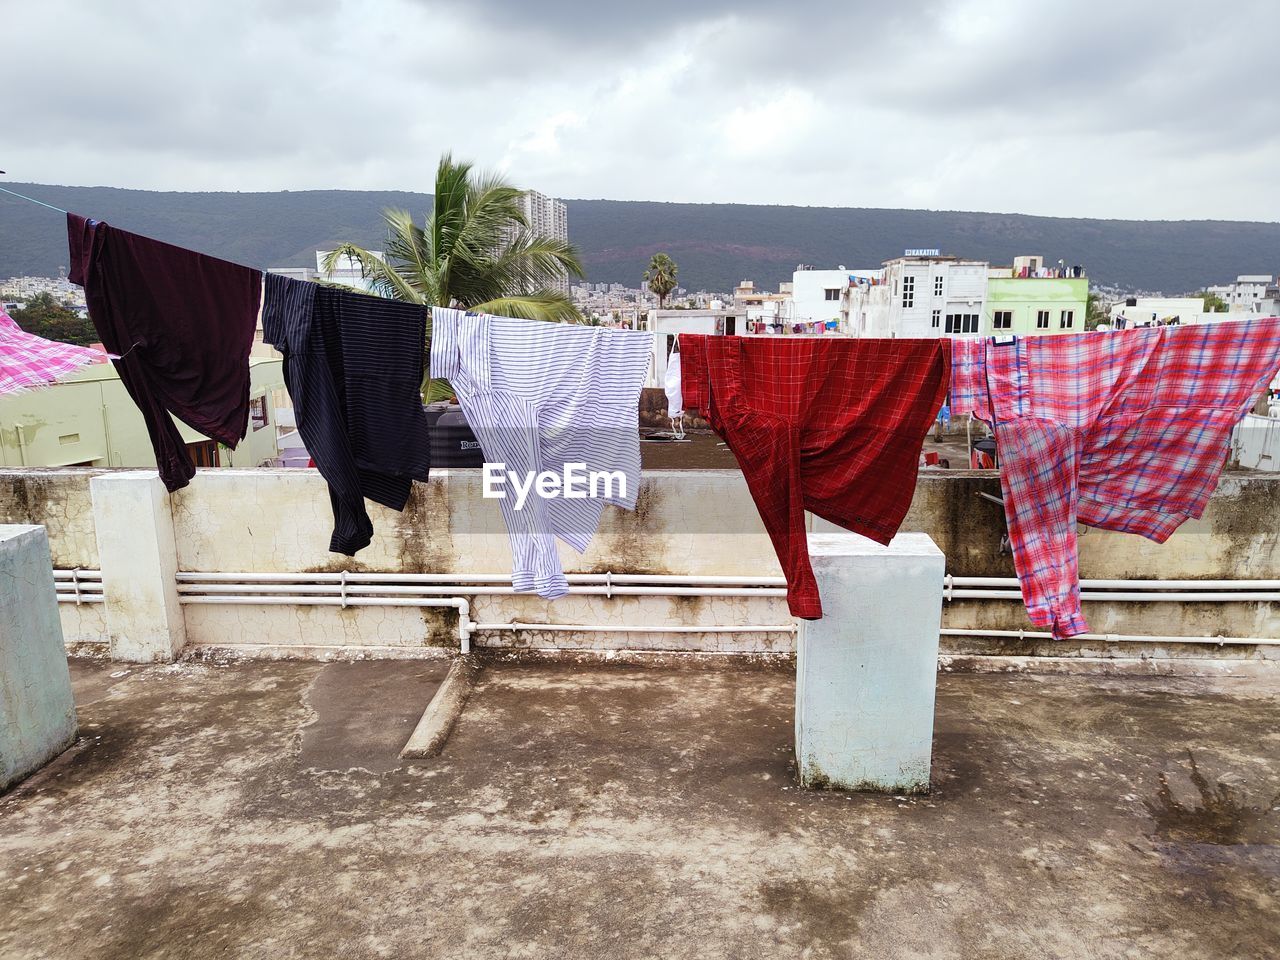 CLOTHES DRYING ON CLOTHESLINE AGAINST BUILT STRUCTURES